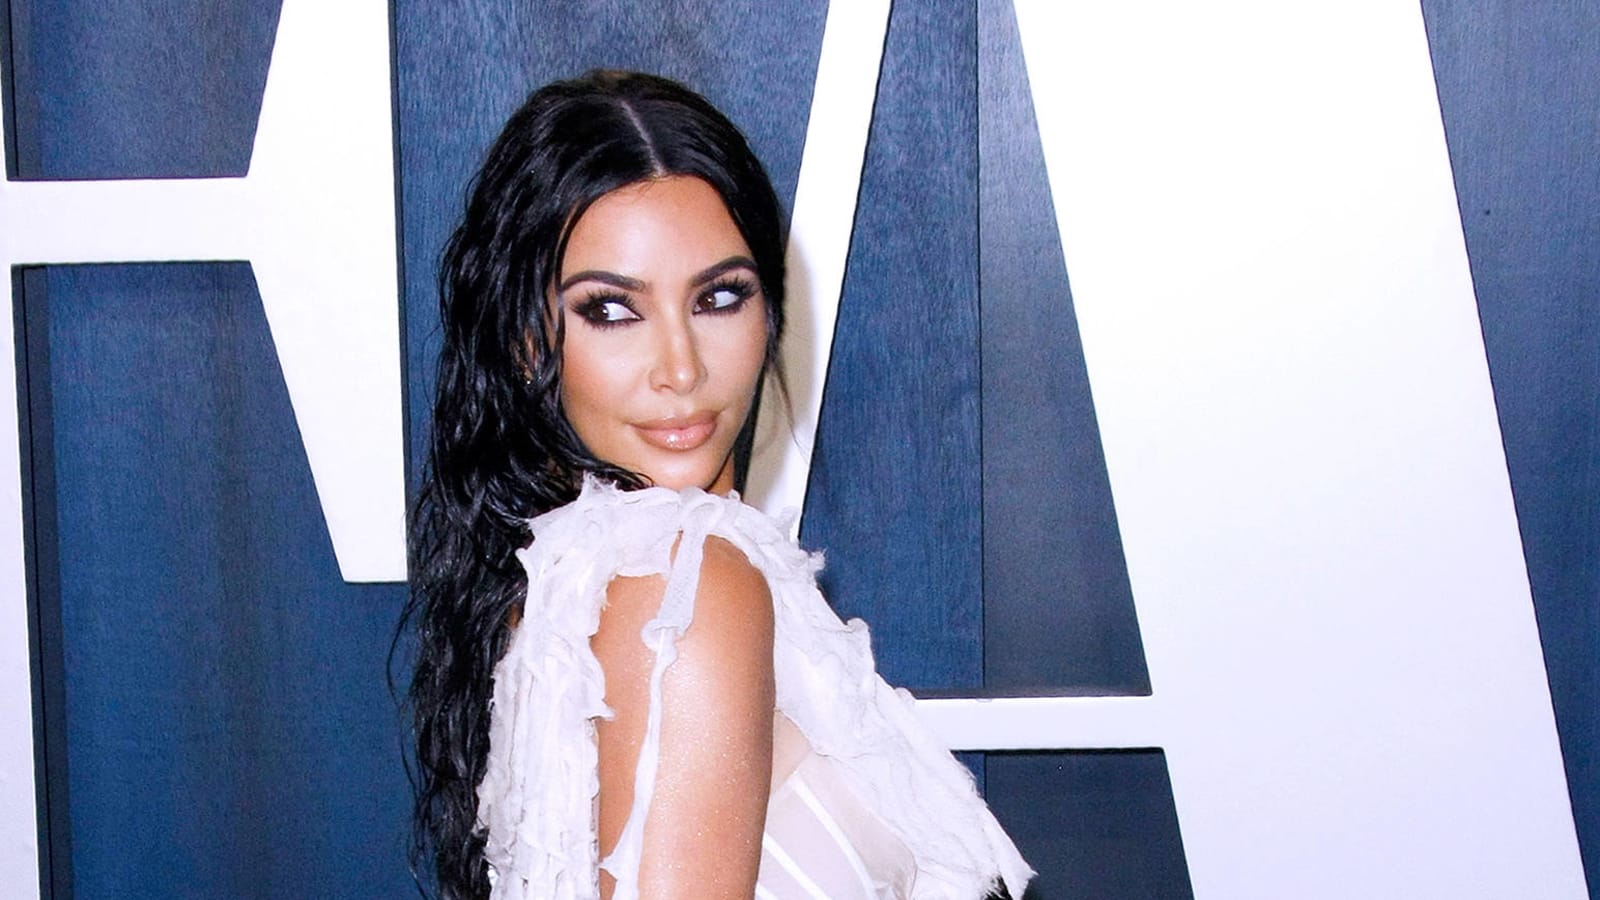 Kim Kardashian reflects on 'KUWTK': 'We didn't really expect it to go on this long'